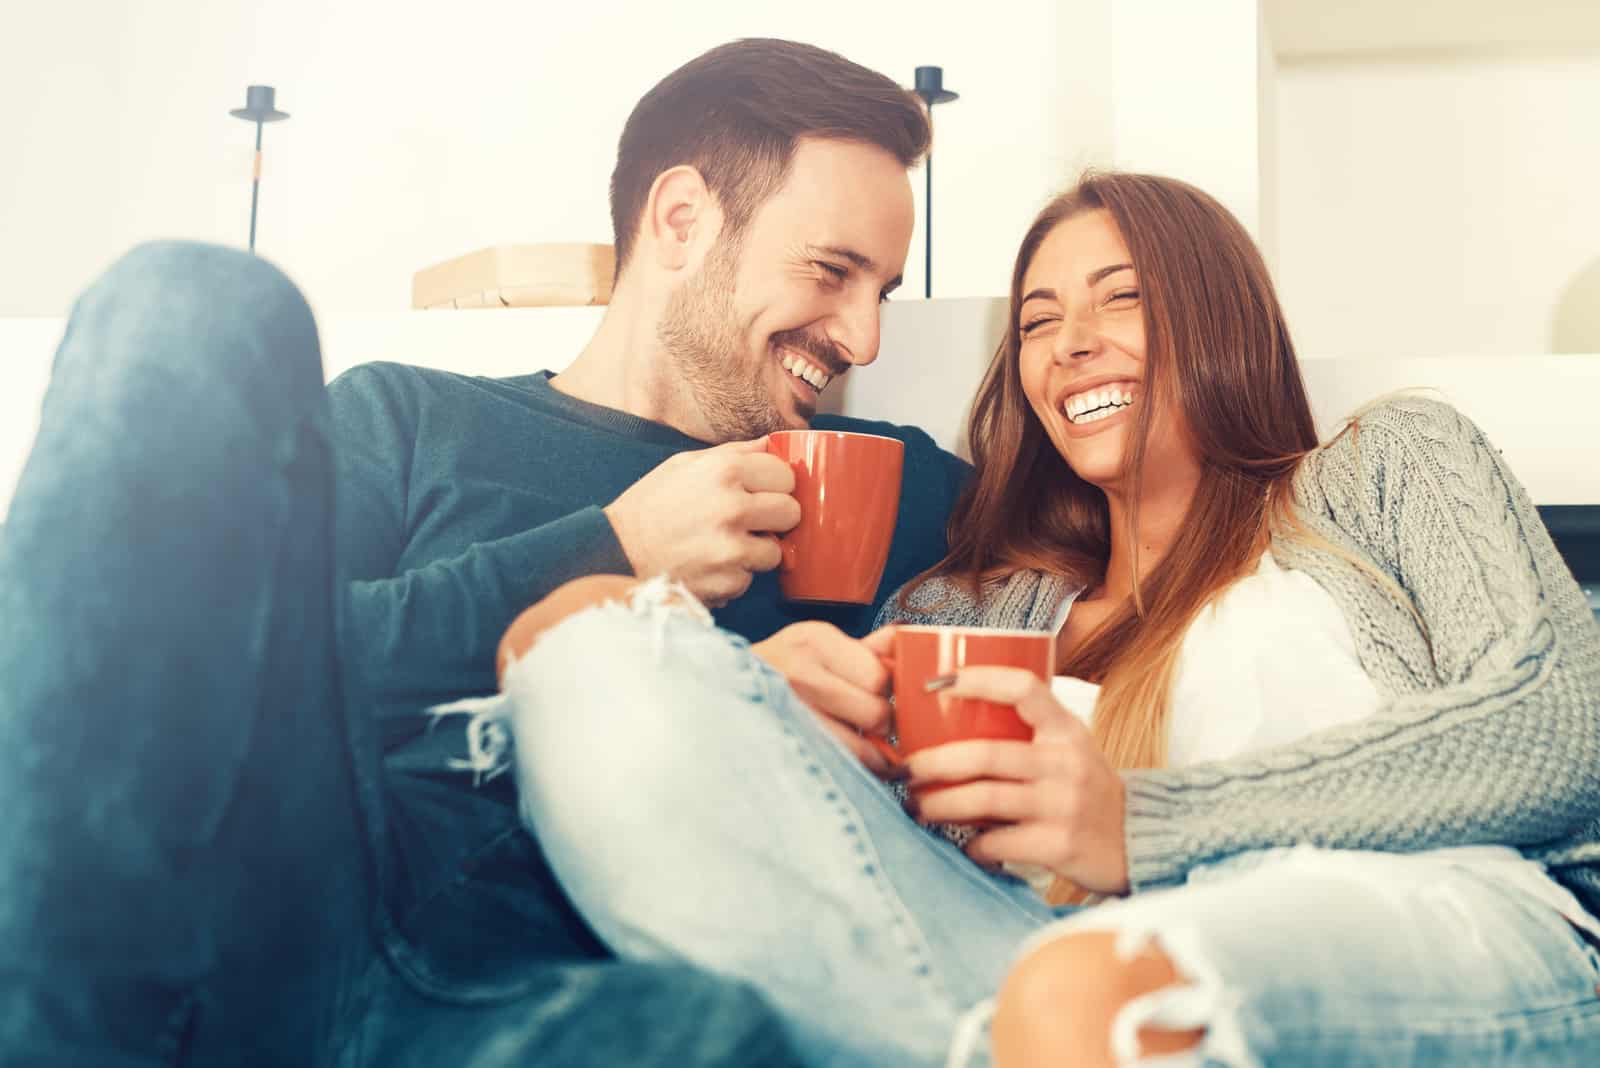 a smiling man and woman sit on the couch